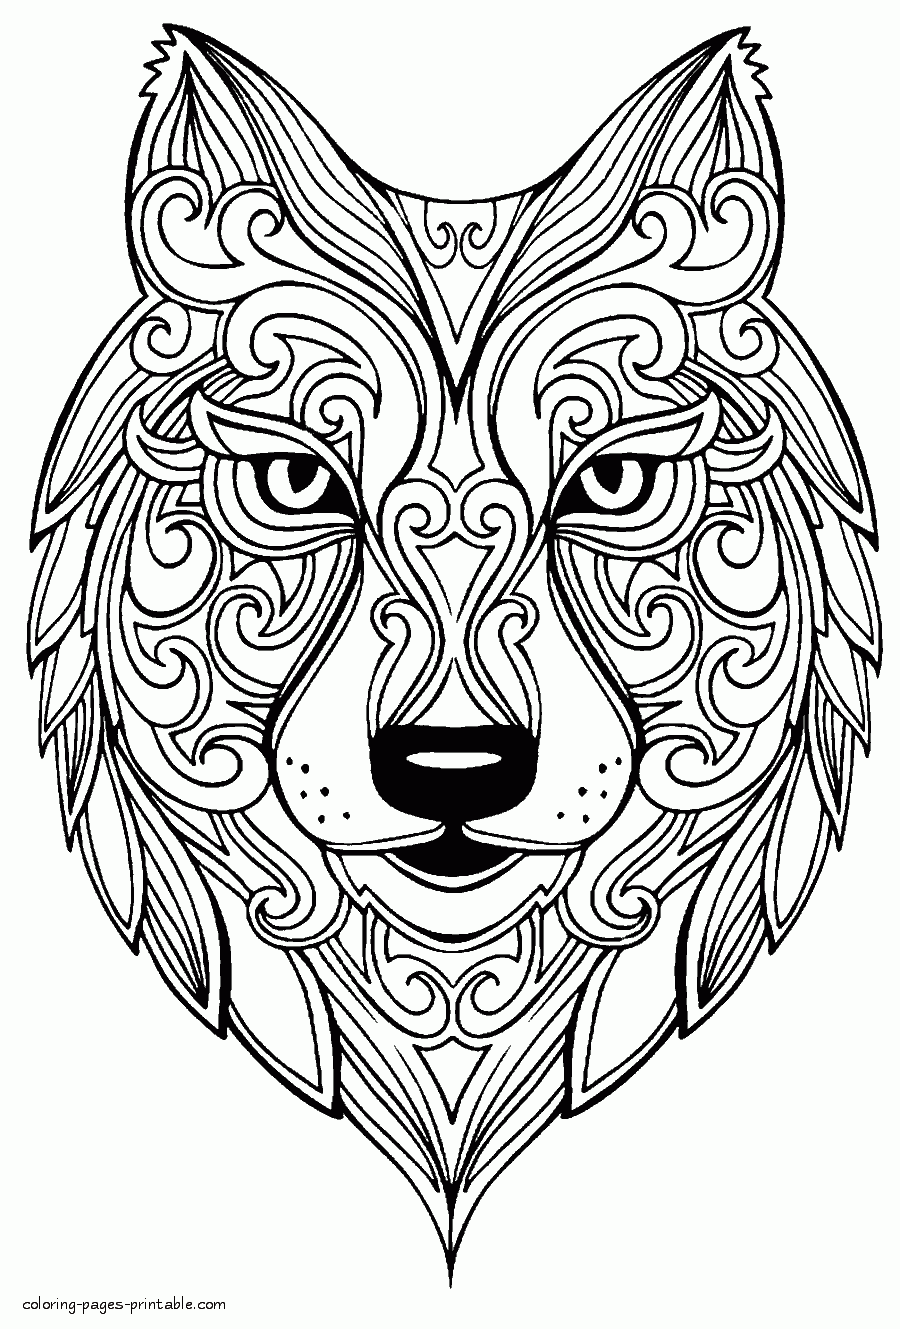 Animal Printable Coloring Pictures For Adults || COLORING-PAGES-PRINTABLE .COM